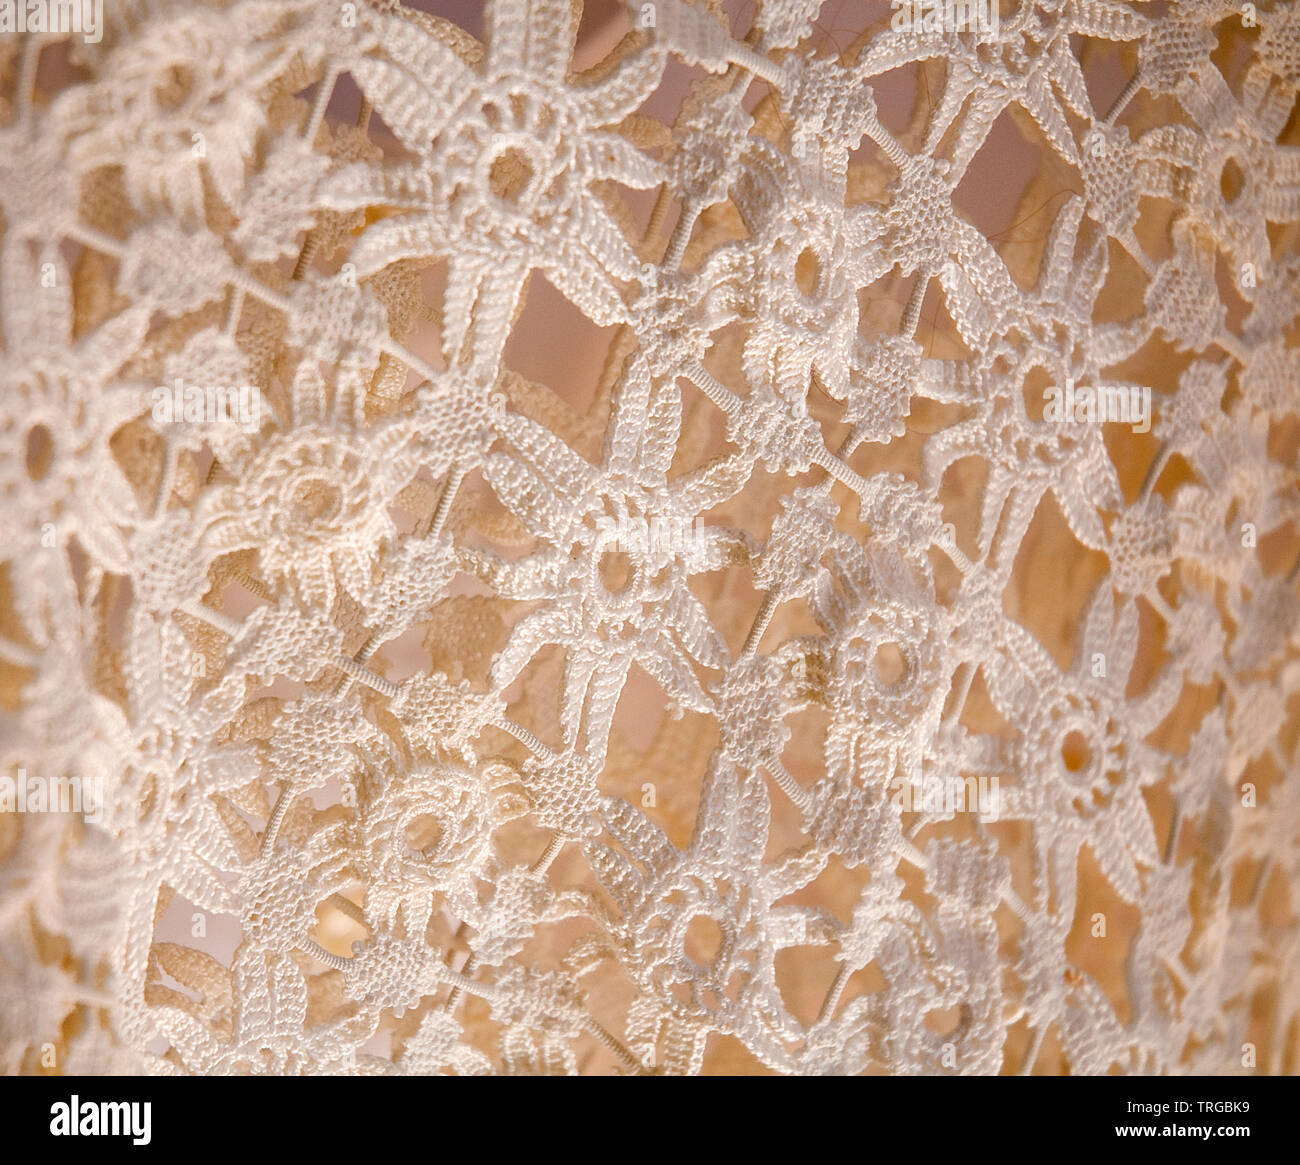 Detail of lace dress Stock Photo